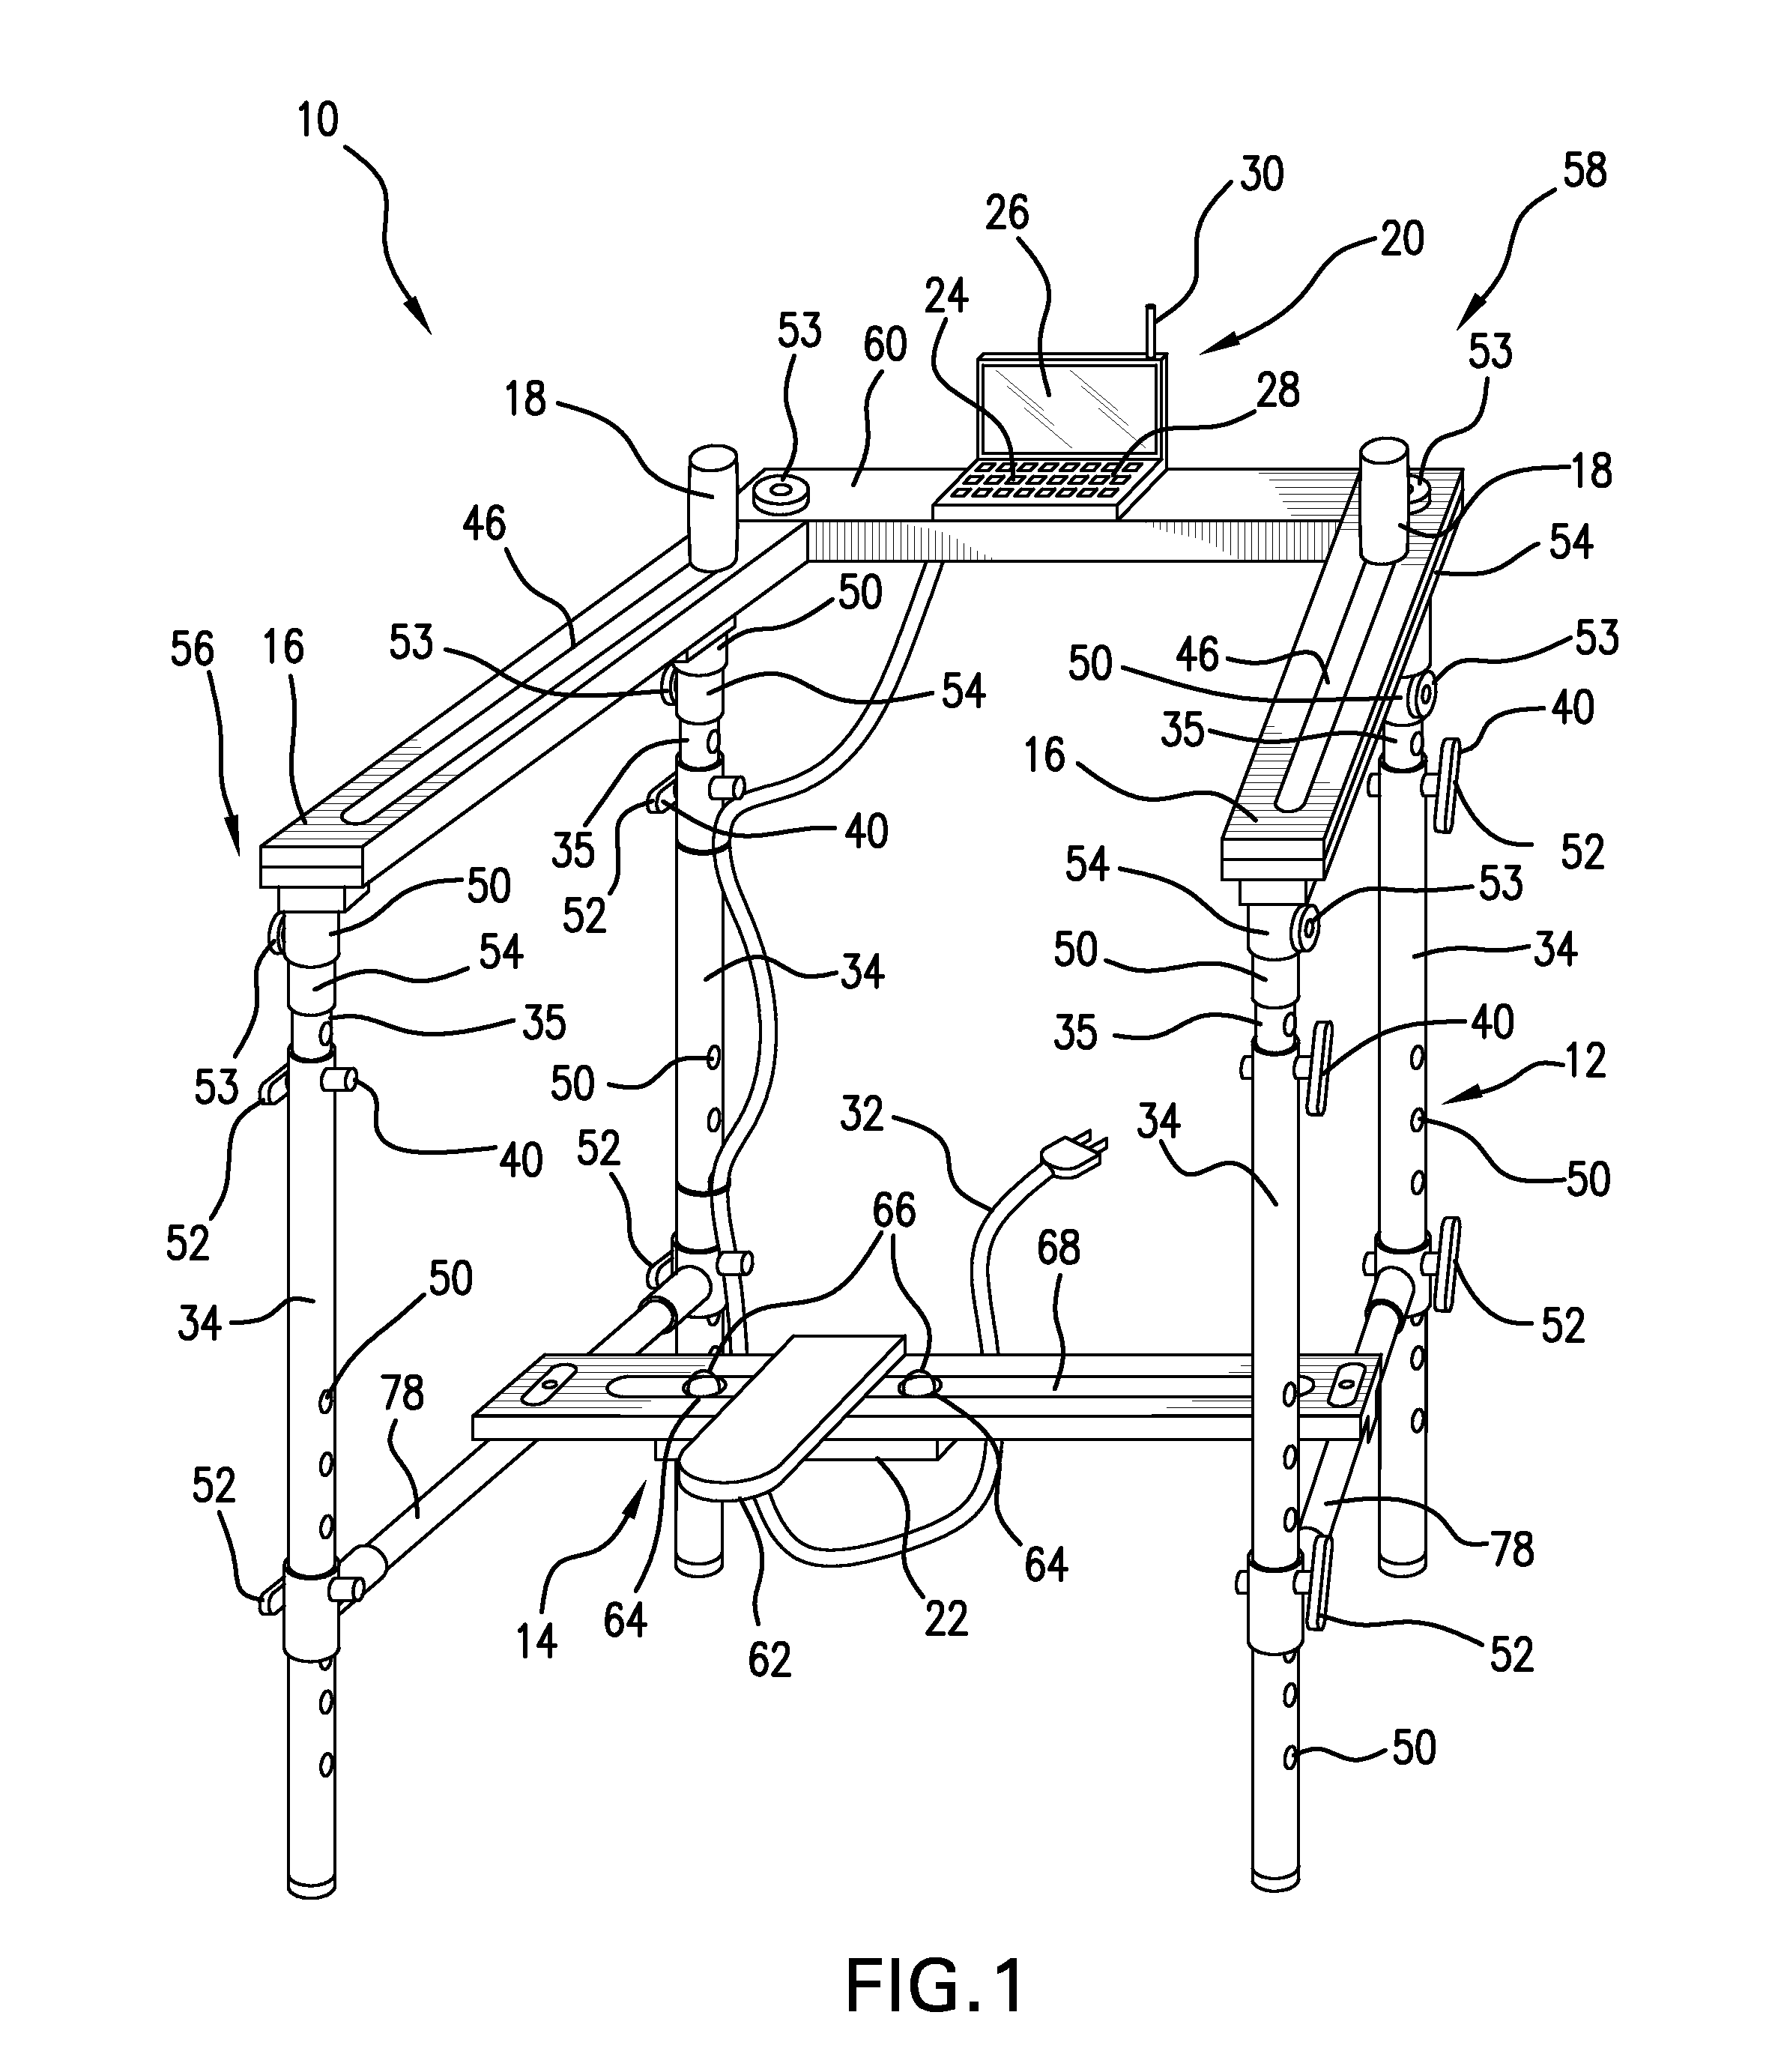 Orthopedic therapy system and device and a method of use